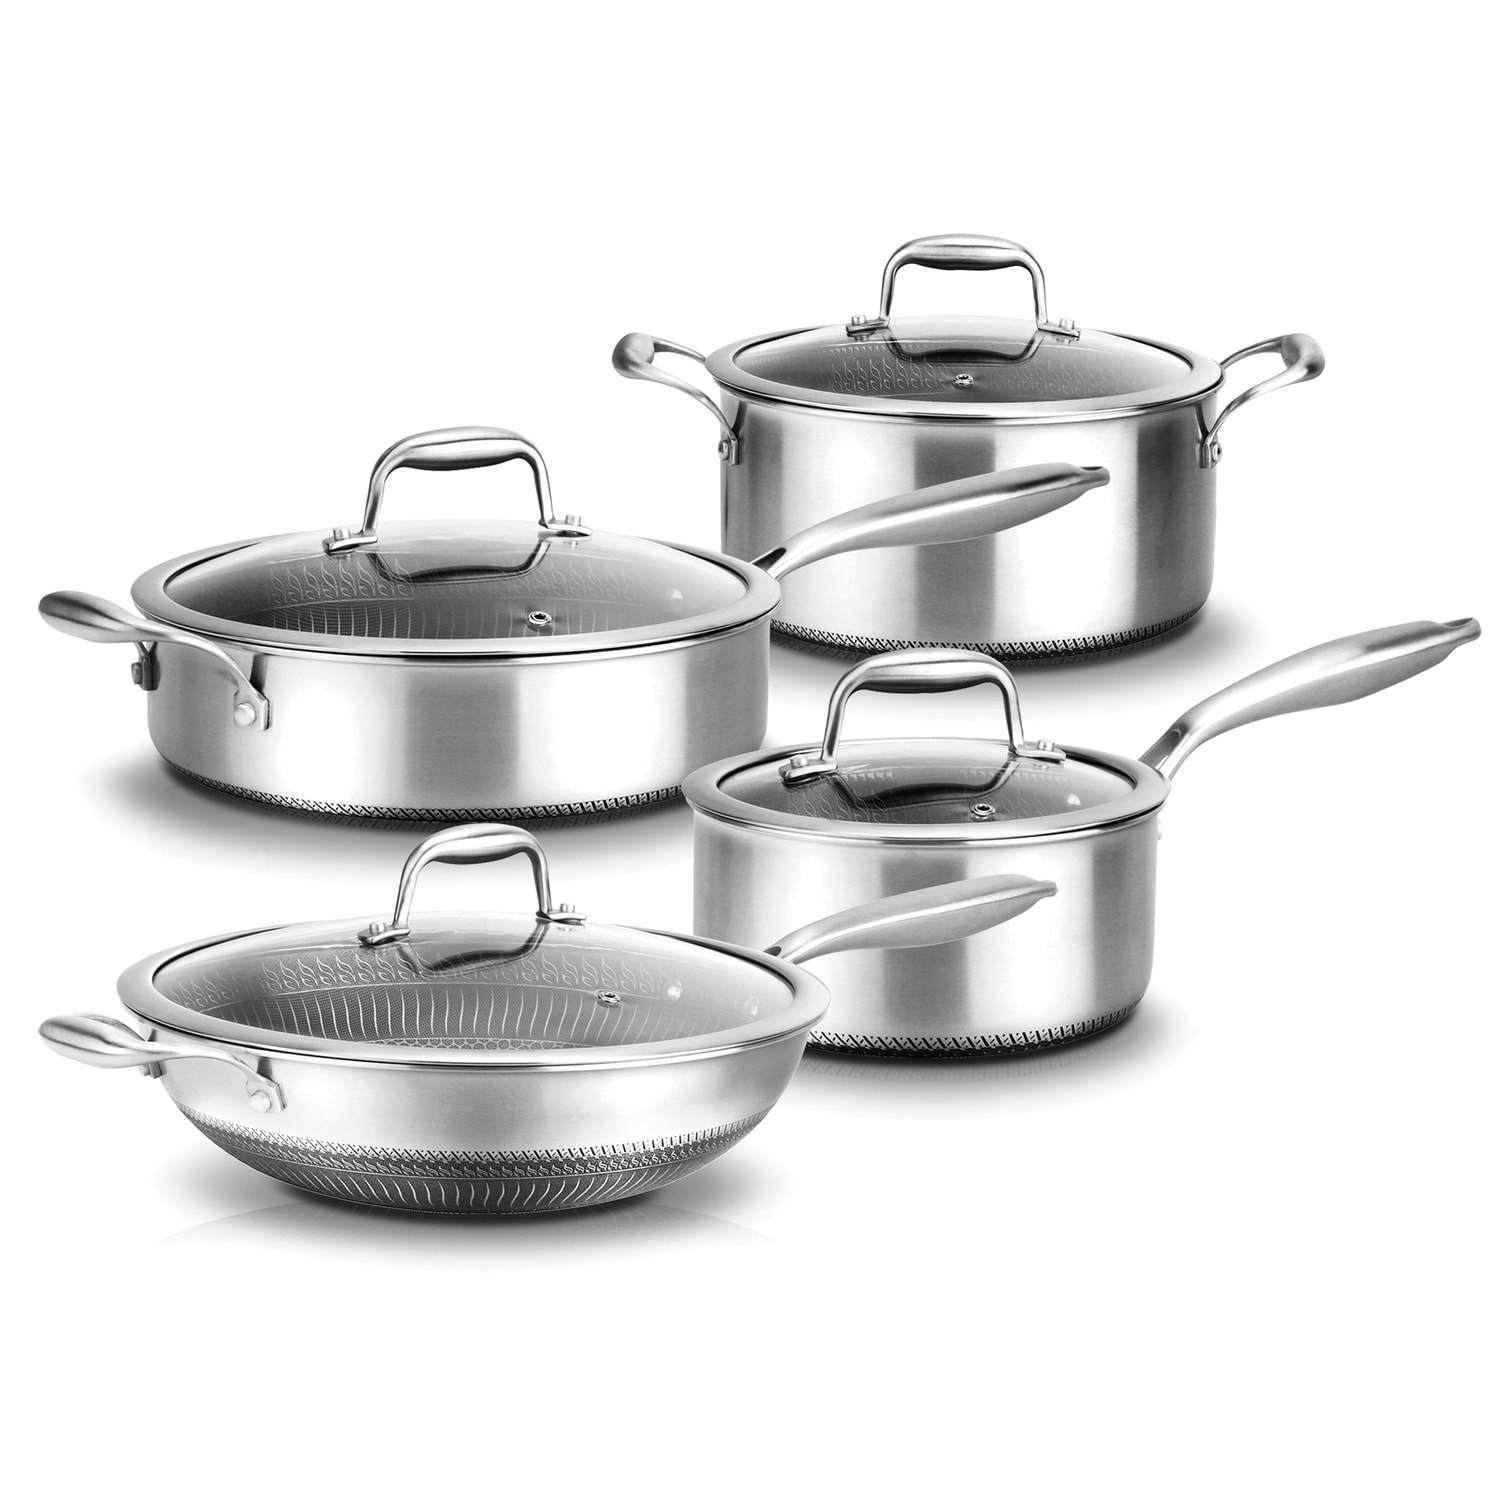 https://ak1.ostkcdn.com/images/products/is/images/direct/3ce48189177acd5865a411e57a2a41aaa3168a7b/8-Piece-Nonstick-Tri-Ply-Stainless-Steel-Cookware-Set.jpg